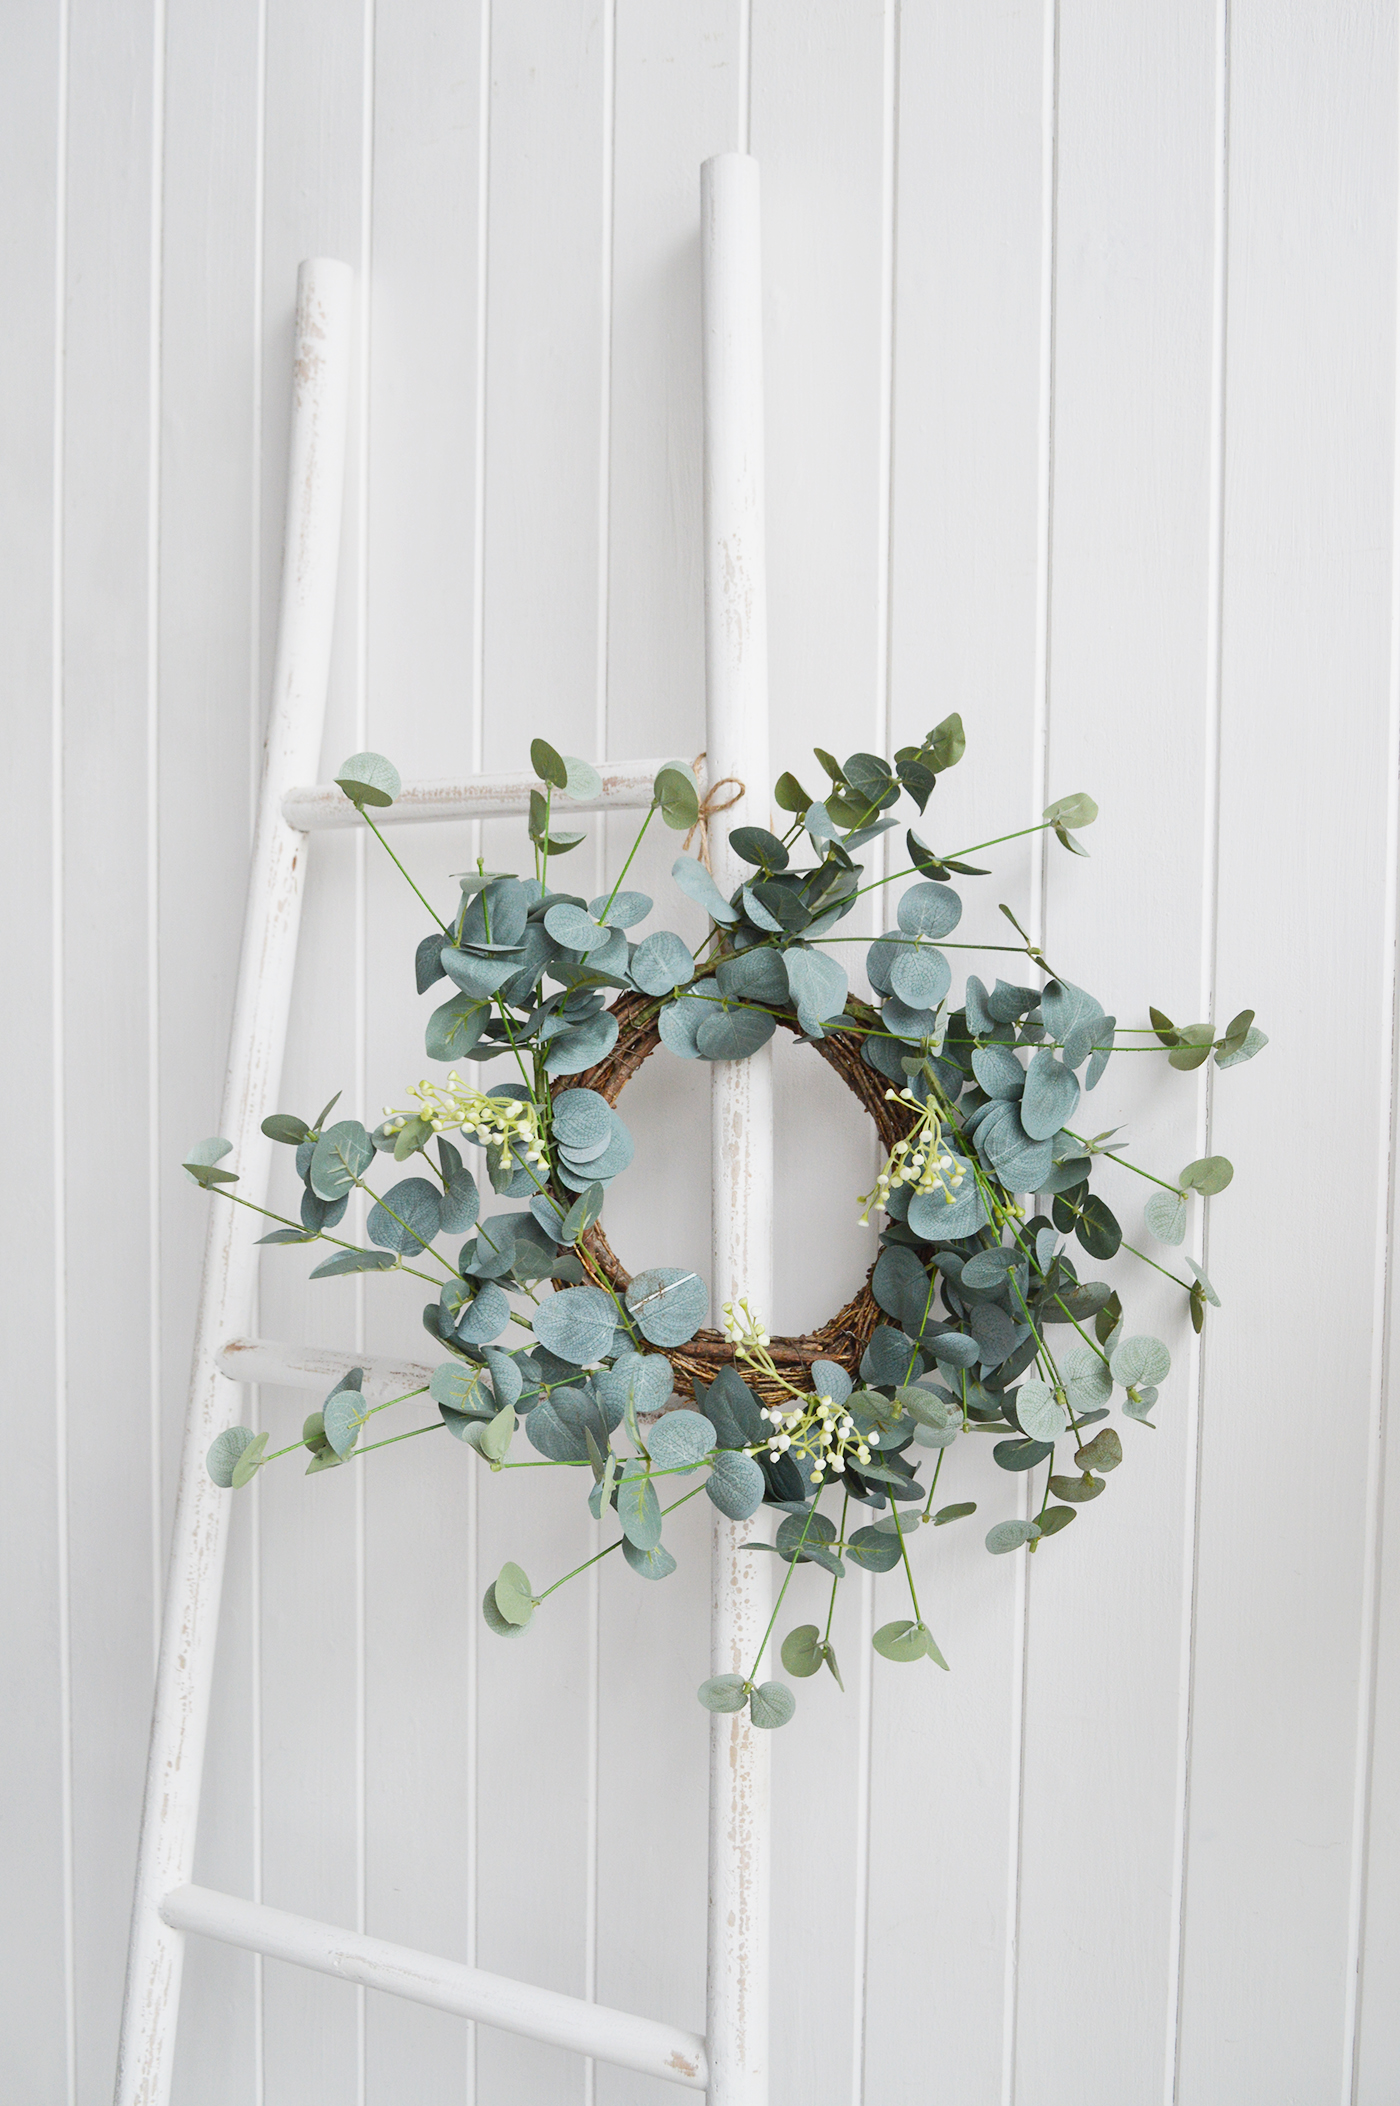 The White Lighthouse. White Furniture and accessories for the home. Artificial greenery Eucalyptus wreath to add greener to a New Enngland style country, coastal or modern farmhouse styled home 